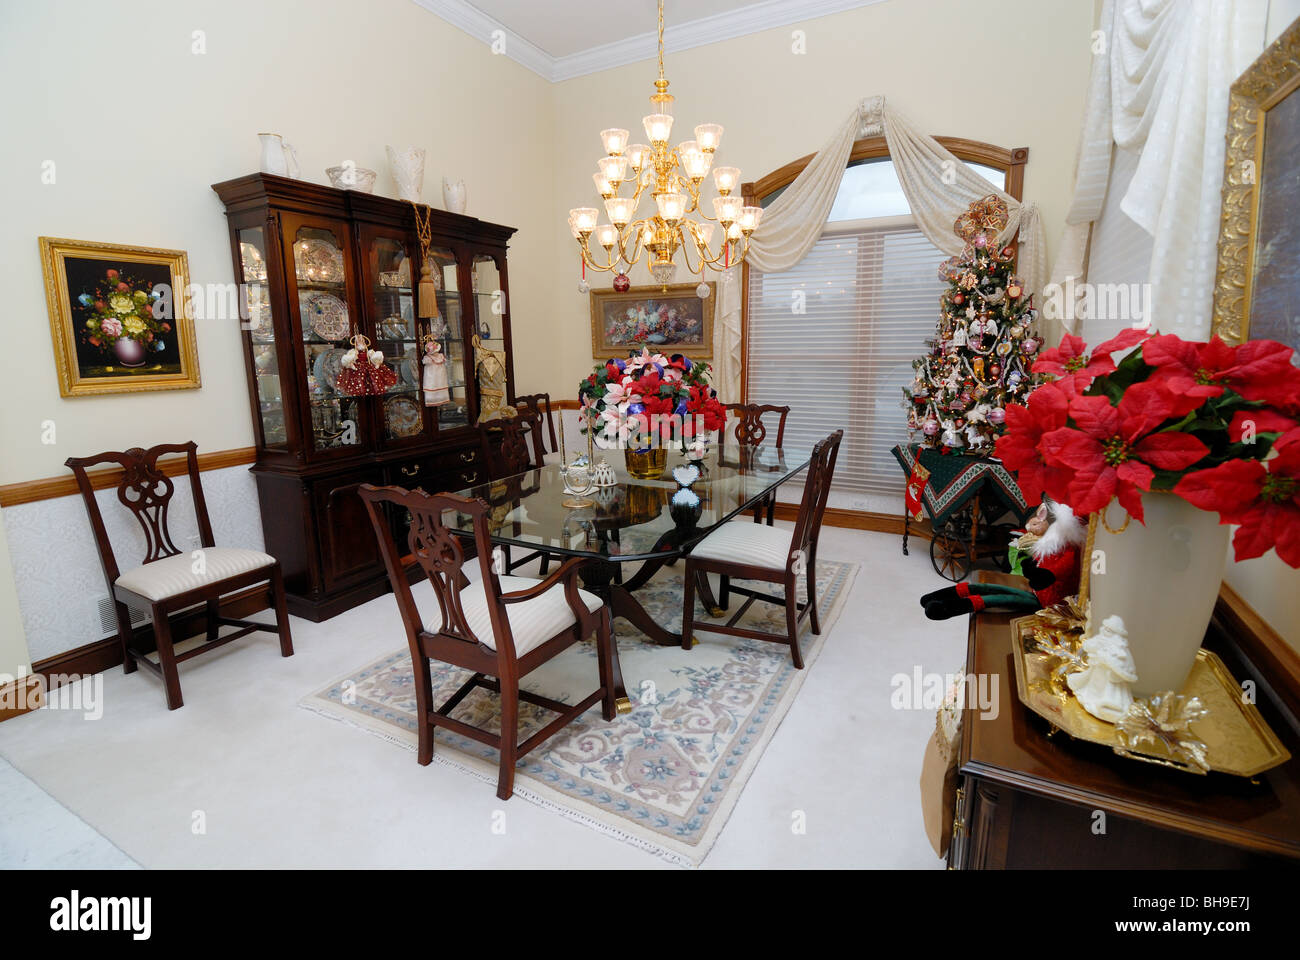 An elegant formal dining room decorated for the holiday season. Stock Photo